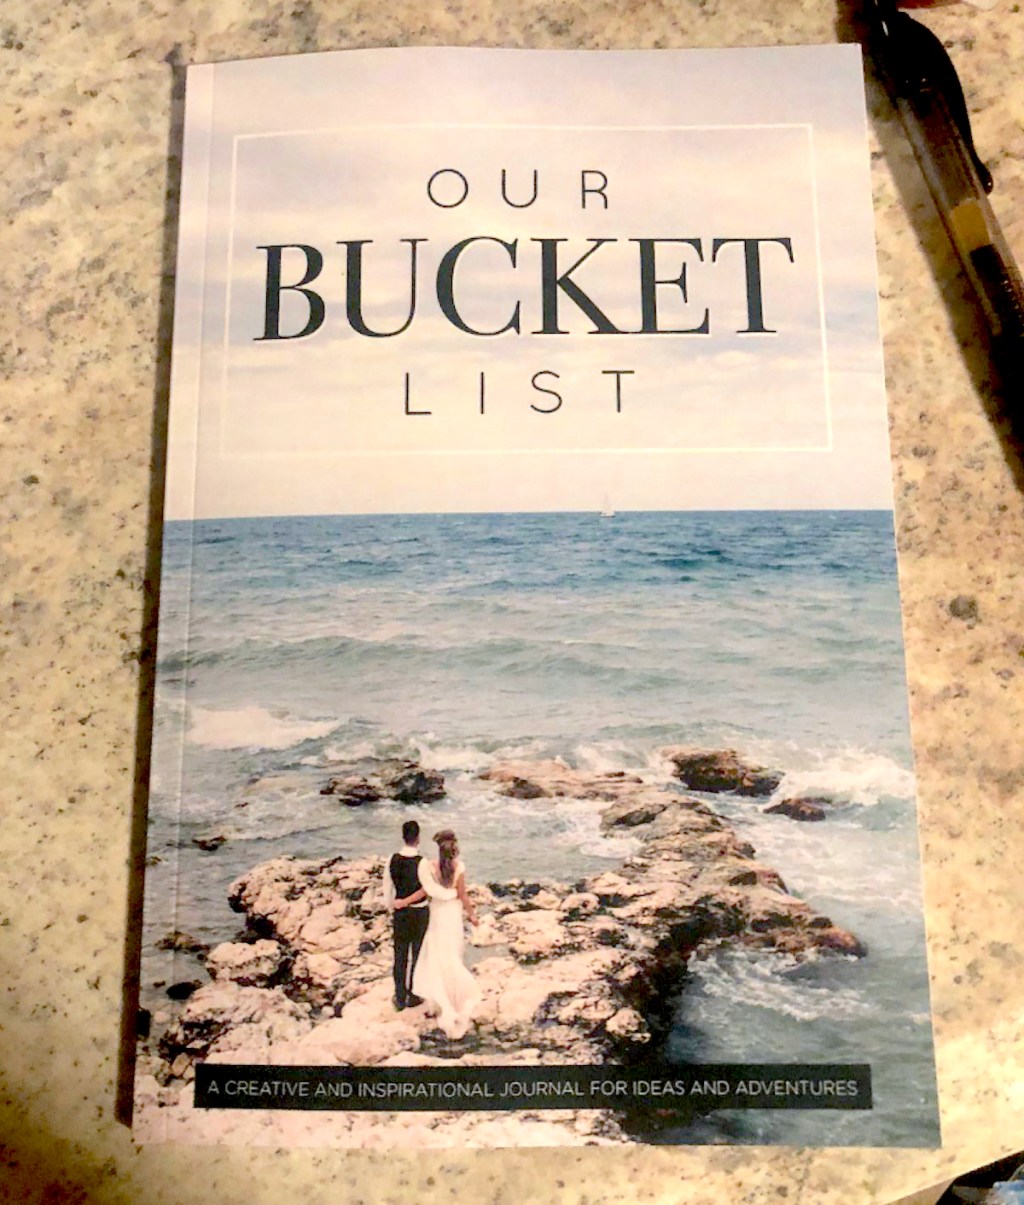 out bucket list paperback book on countertop